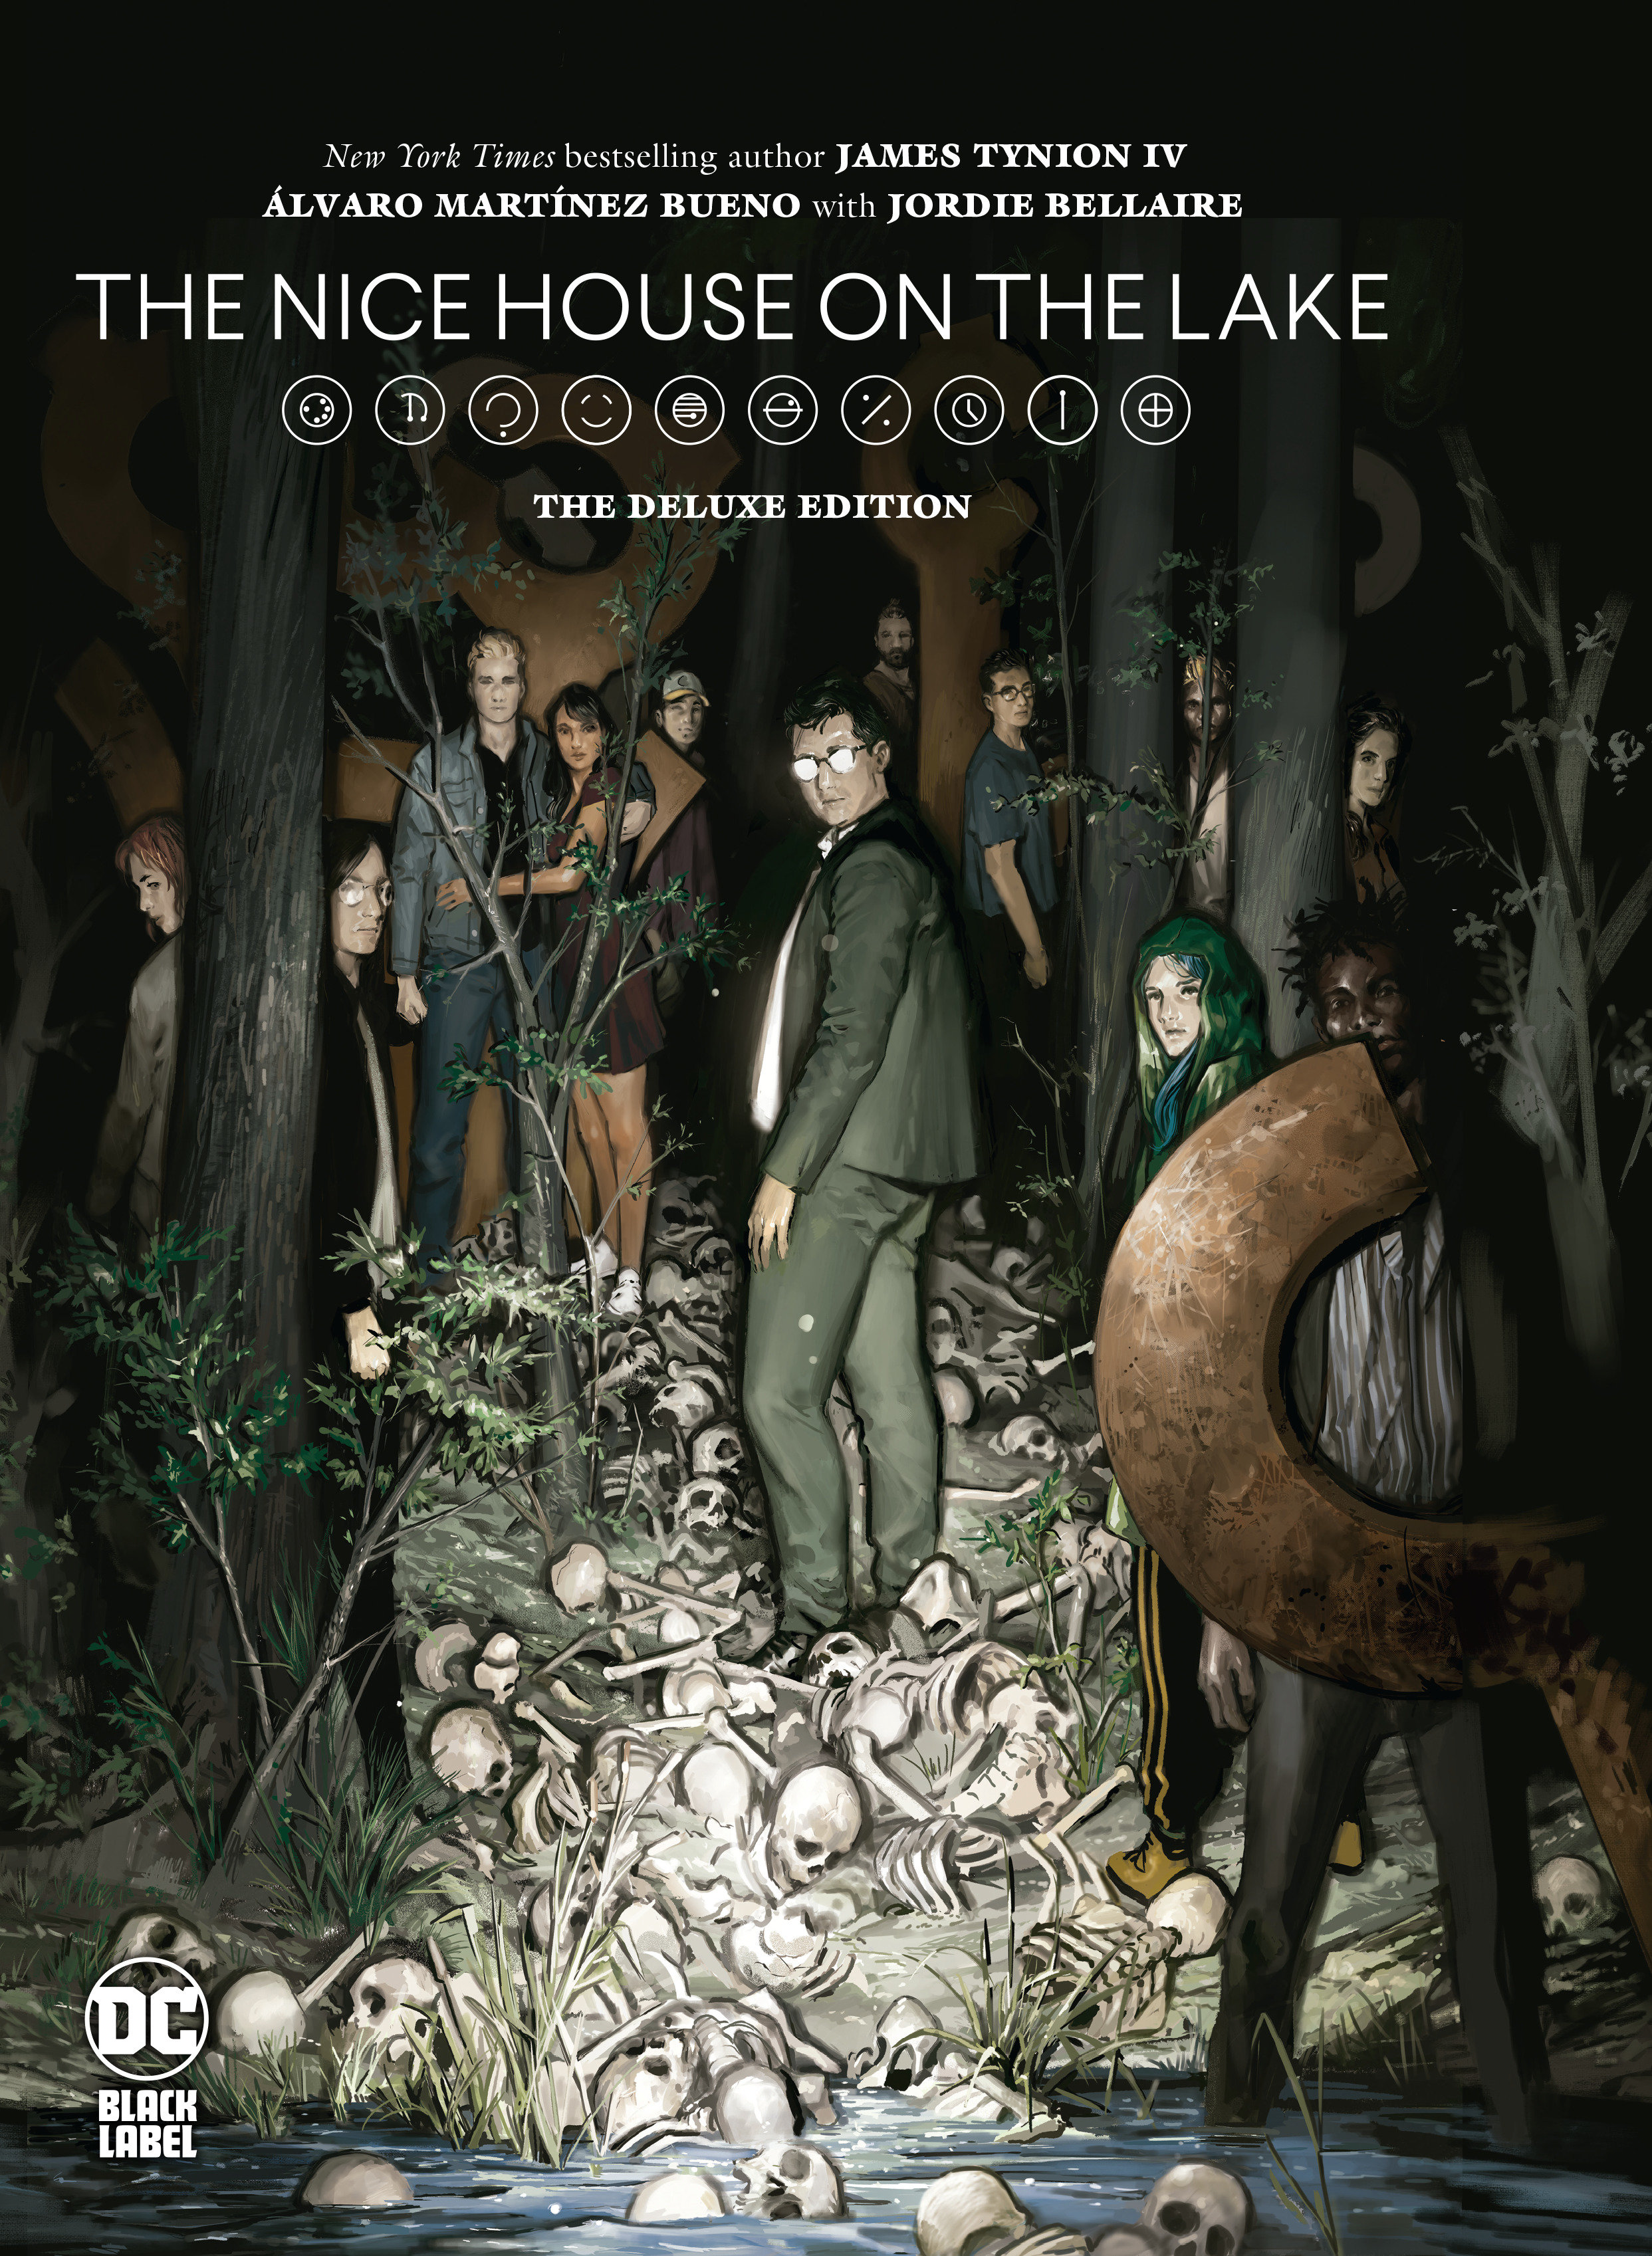 Nice House on the Lake The Deluxe Edition Hardcover (Mature)